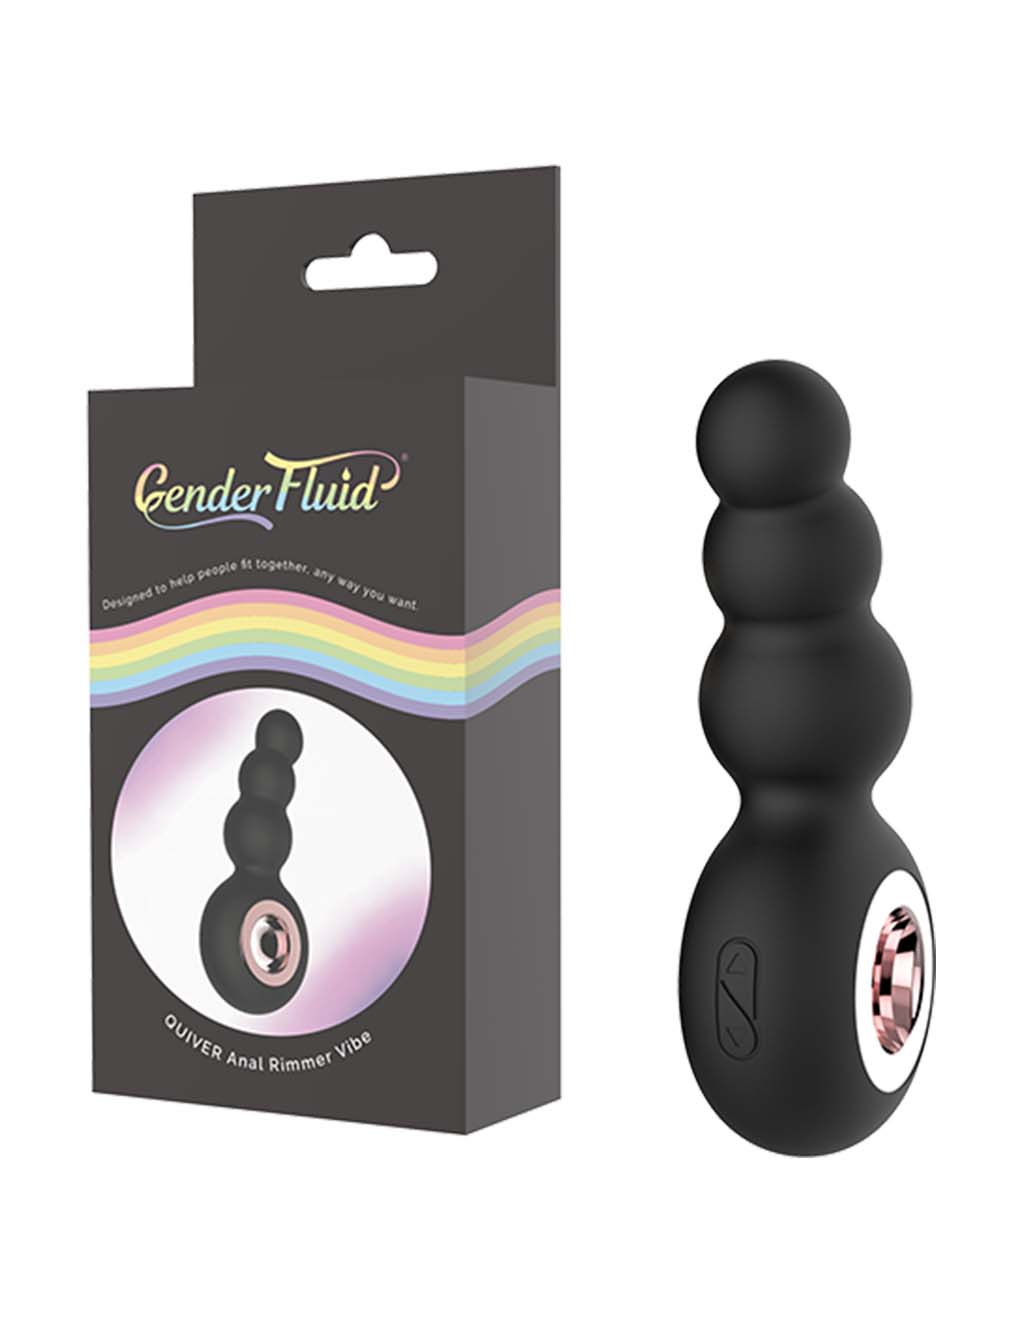 Gender Fluid Quiver Anal Ring Bead Vibe - Toy with Box